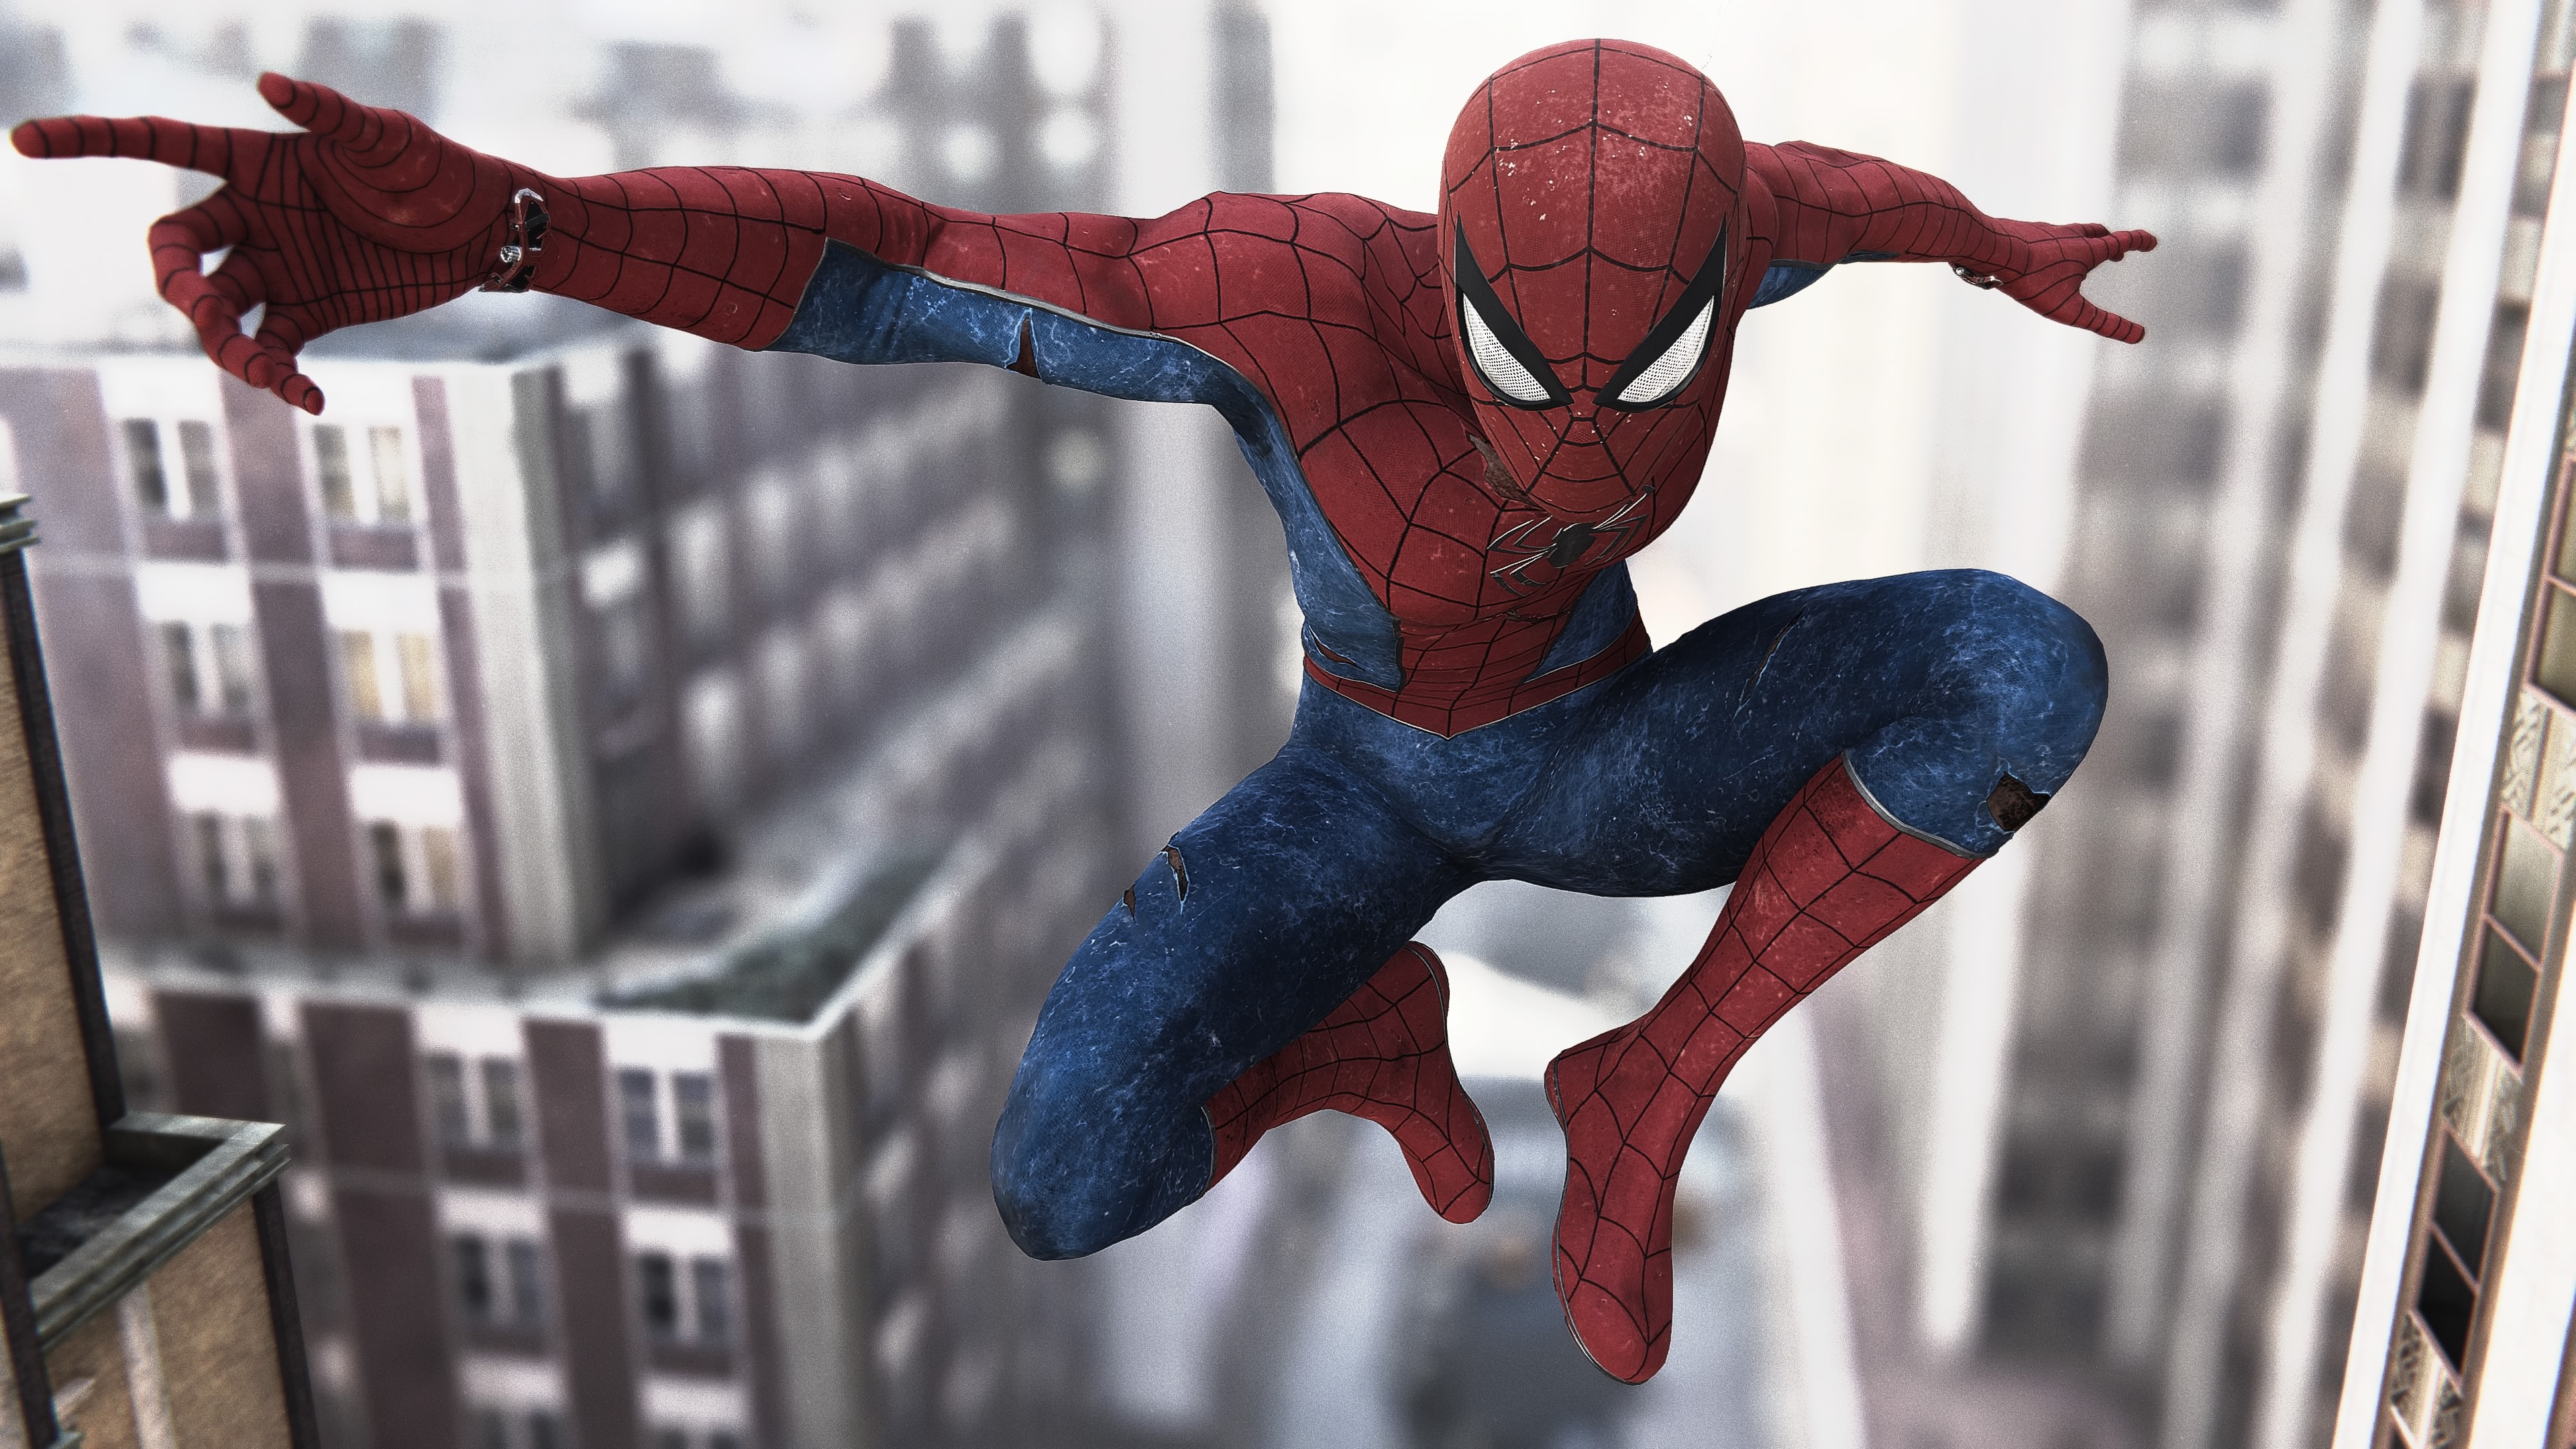 spiderman ps4 video game 2019 4k 1547938265 - Spiderman Ps4 Video Game 2019 4k - superheroes wallpapers, spiderman wallpapers, spiderman ps4 wallpapers, ps games wallpapers, hd-wallpapers, games wallpapers, 4k-wallpapers, 2019 games wallpapers